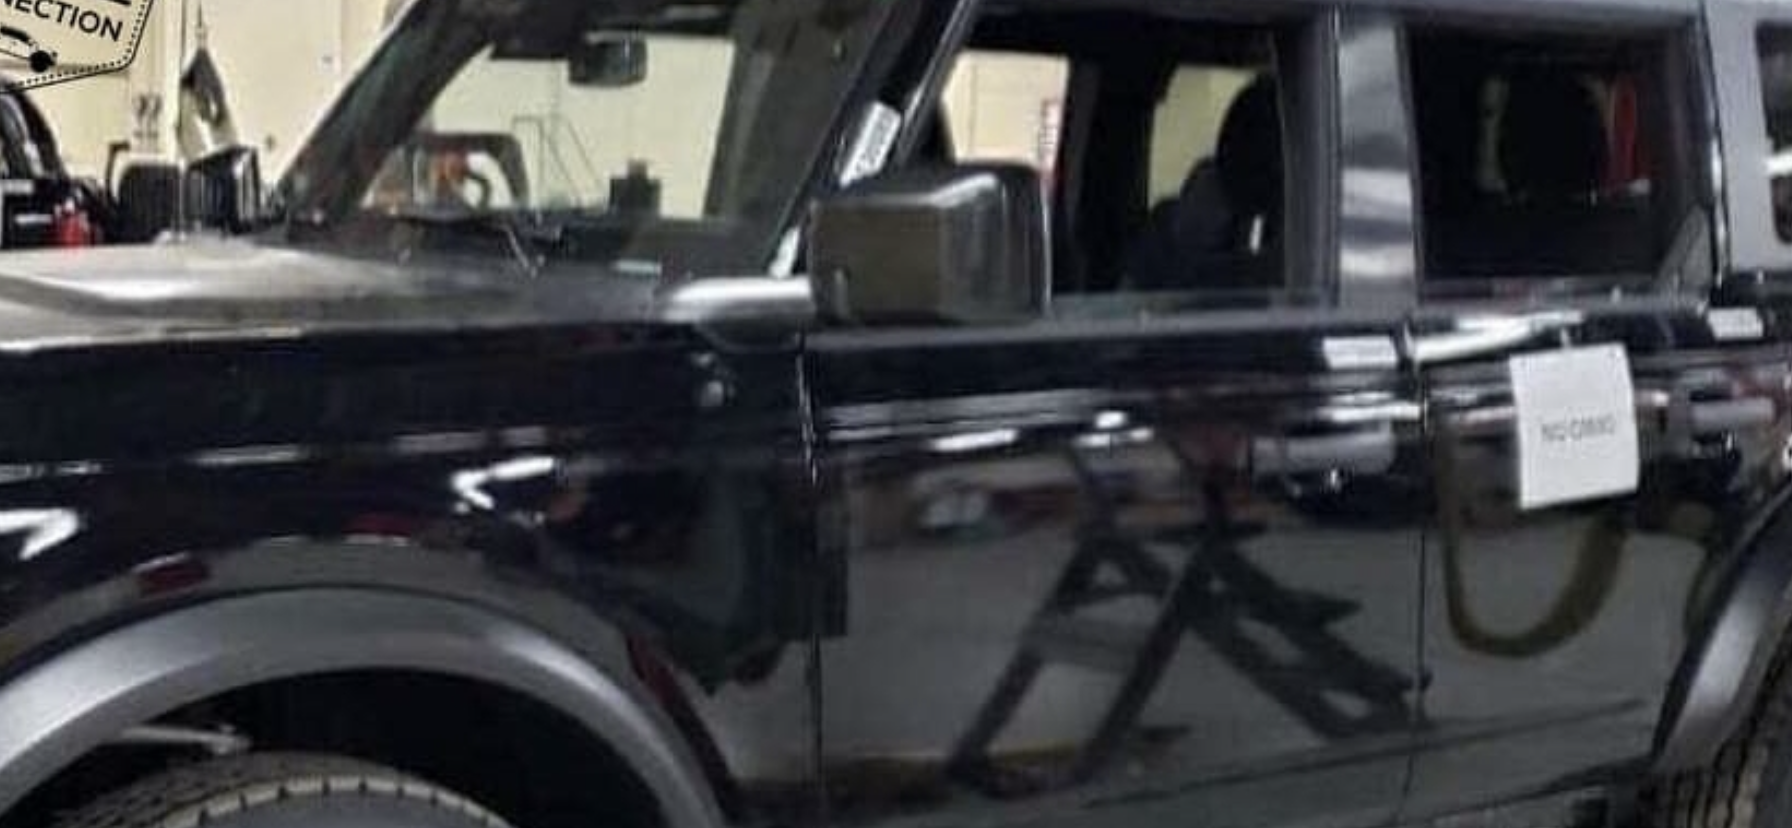 Ford Bronco Best Uncovered Looks Yet! Black 4 Door Bronco + 2 Door Without Top ED7AD1EE-9A75-42DF-B269-562D4F0B200F